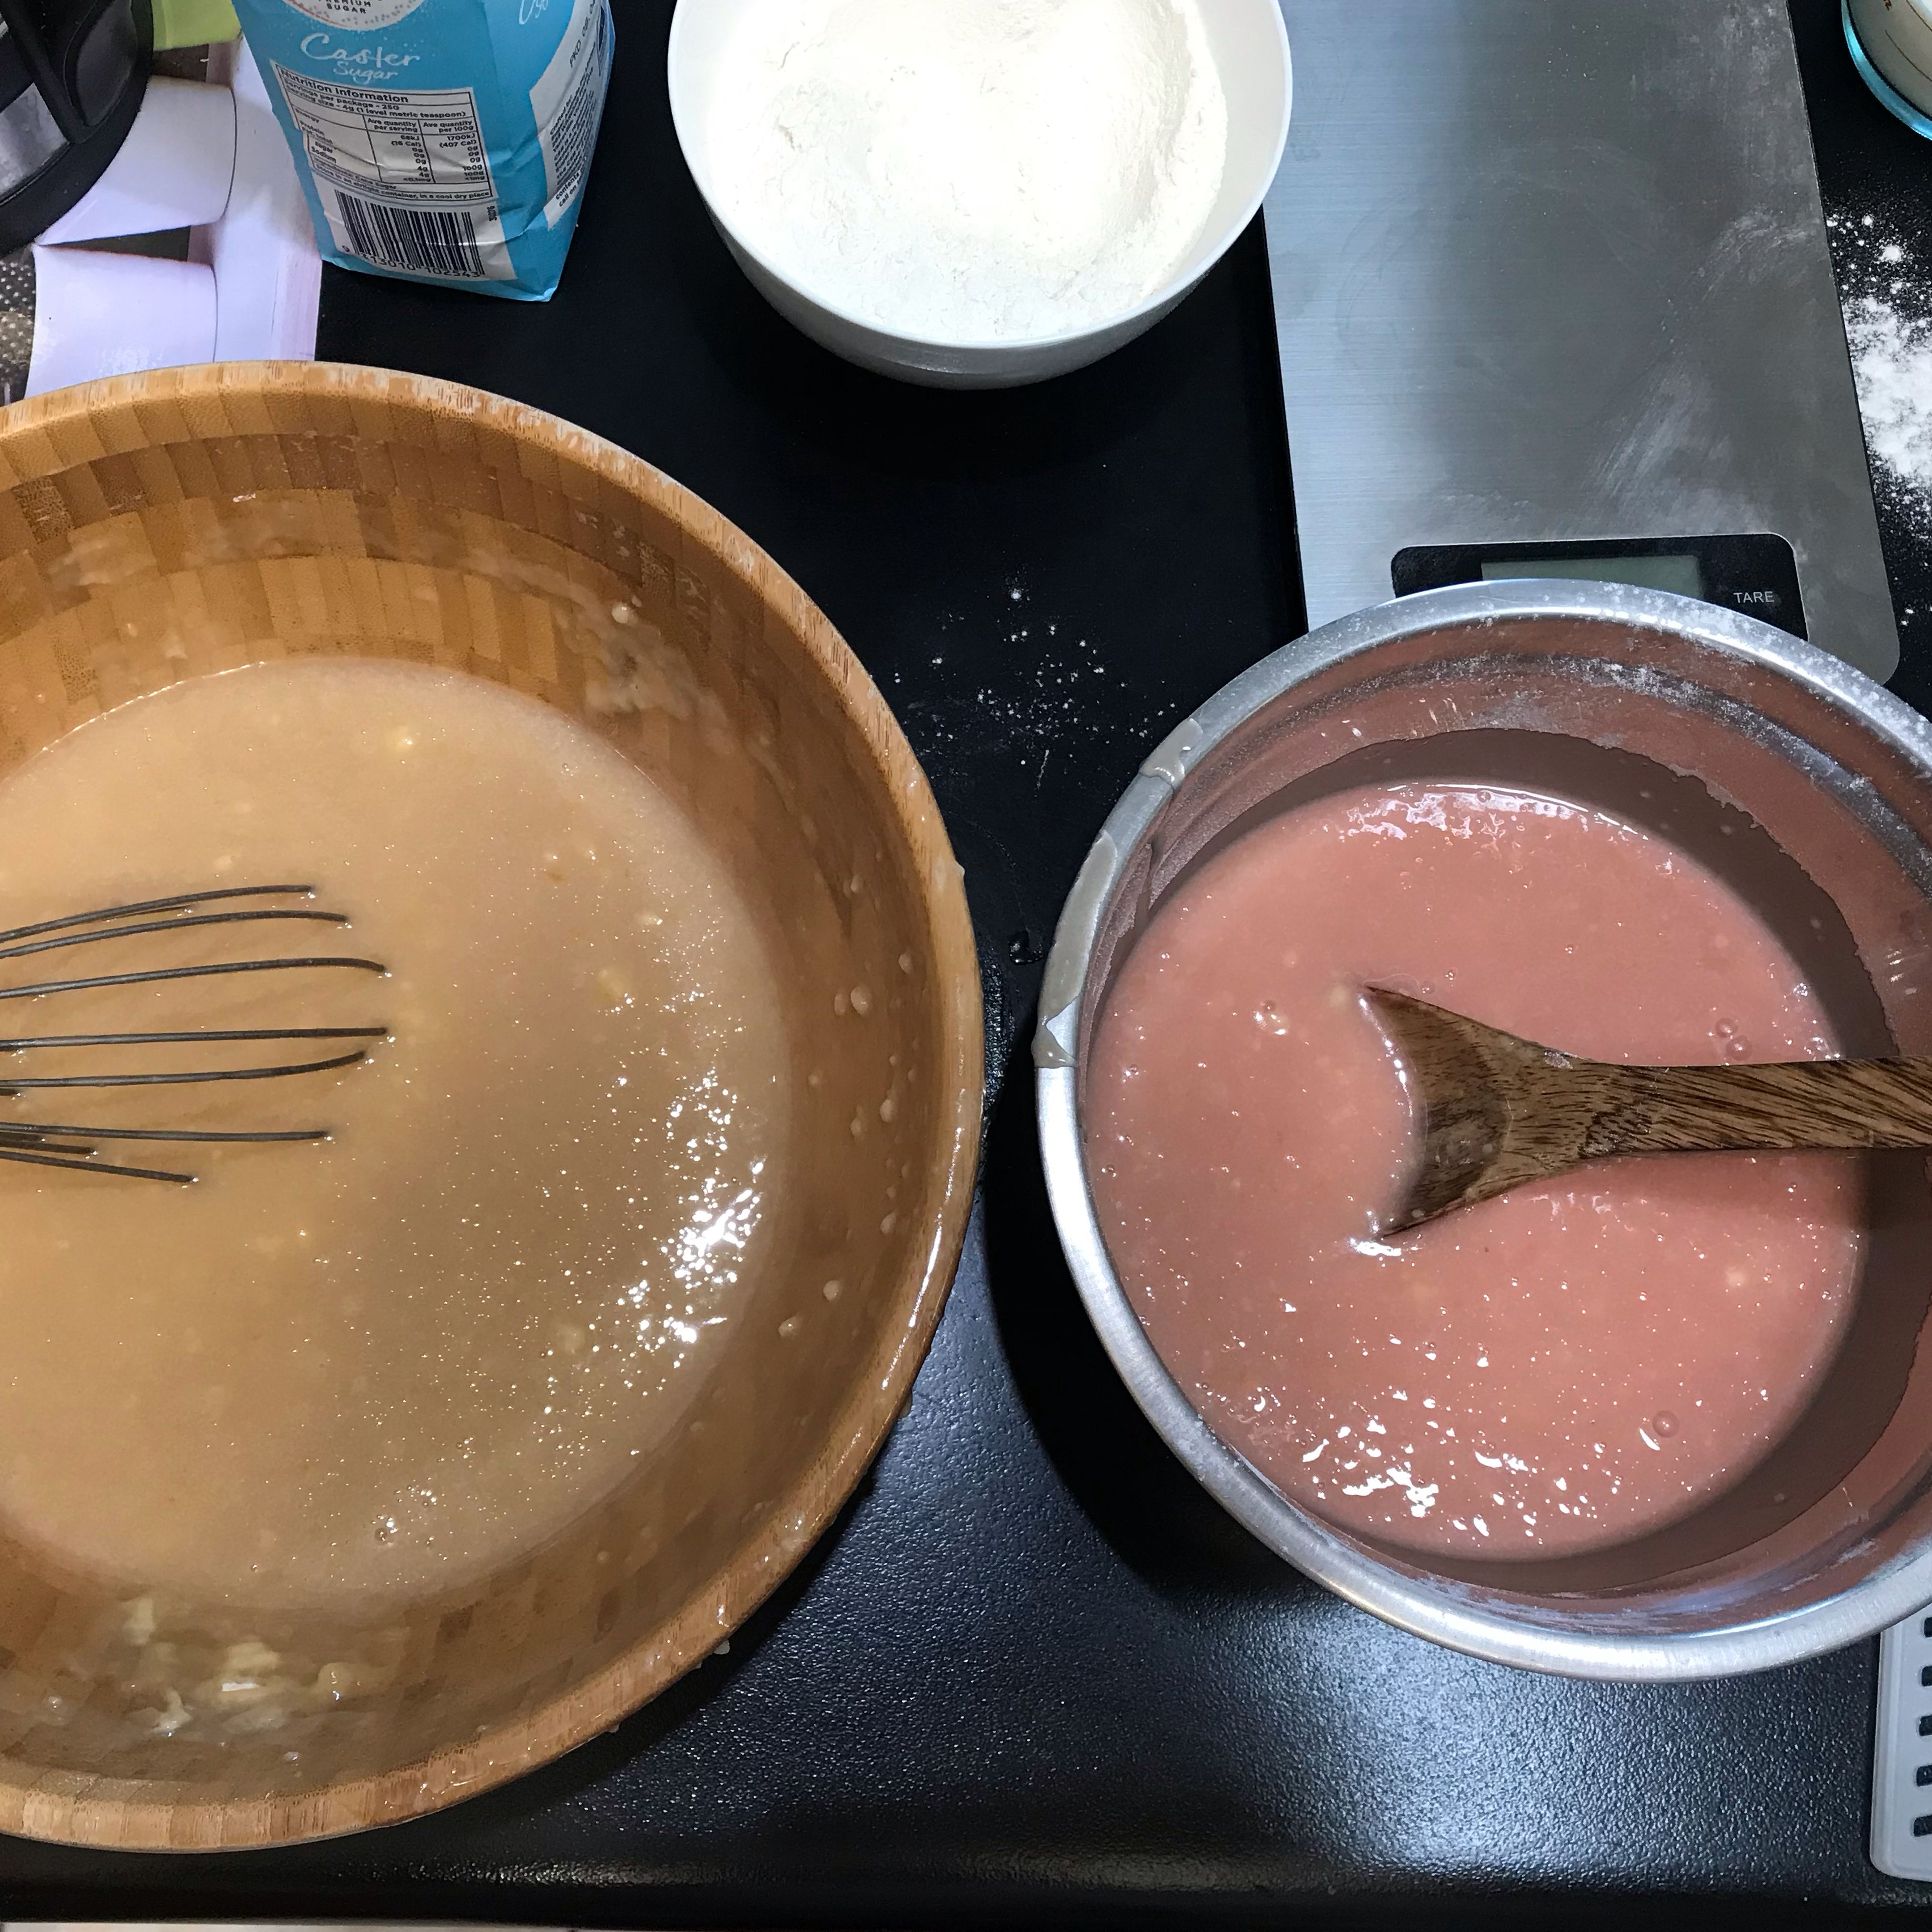 Divide the cake batter evenly between two bowls. Tint one bowl with pink food coloring and mix until colored.